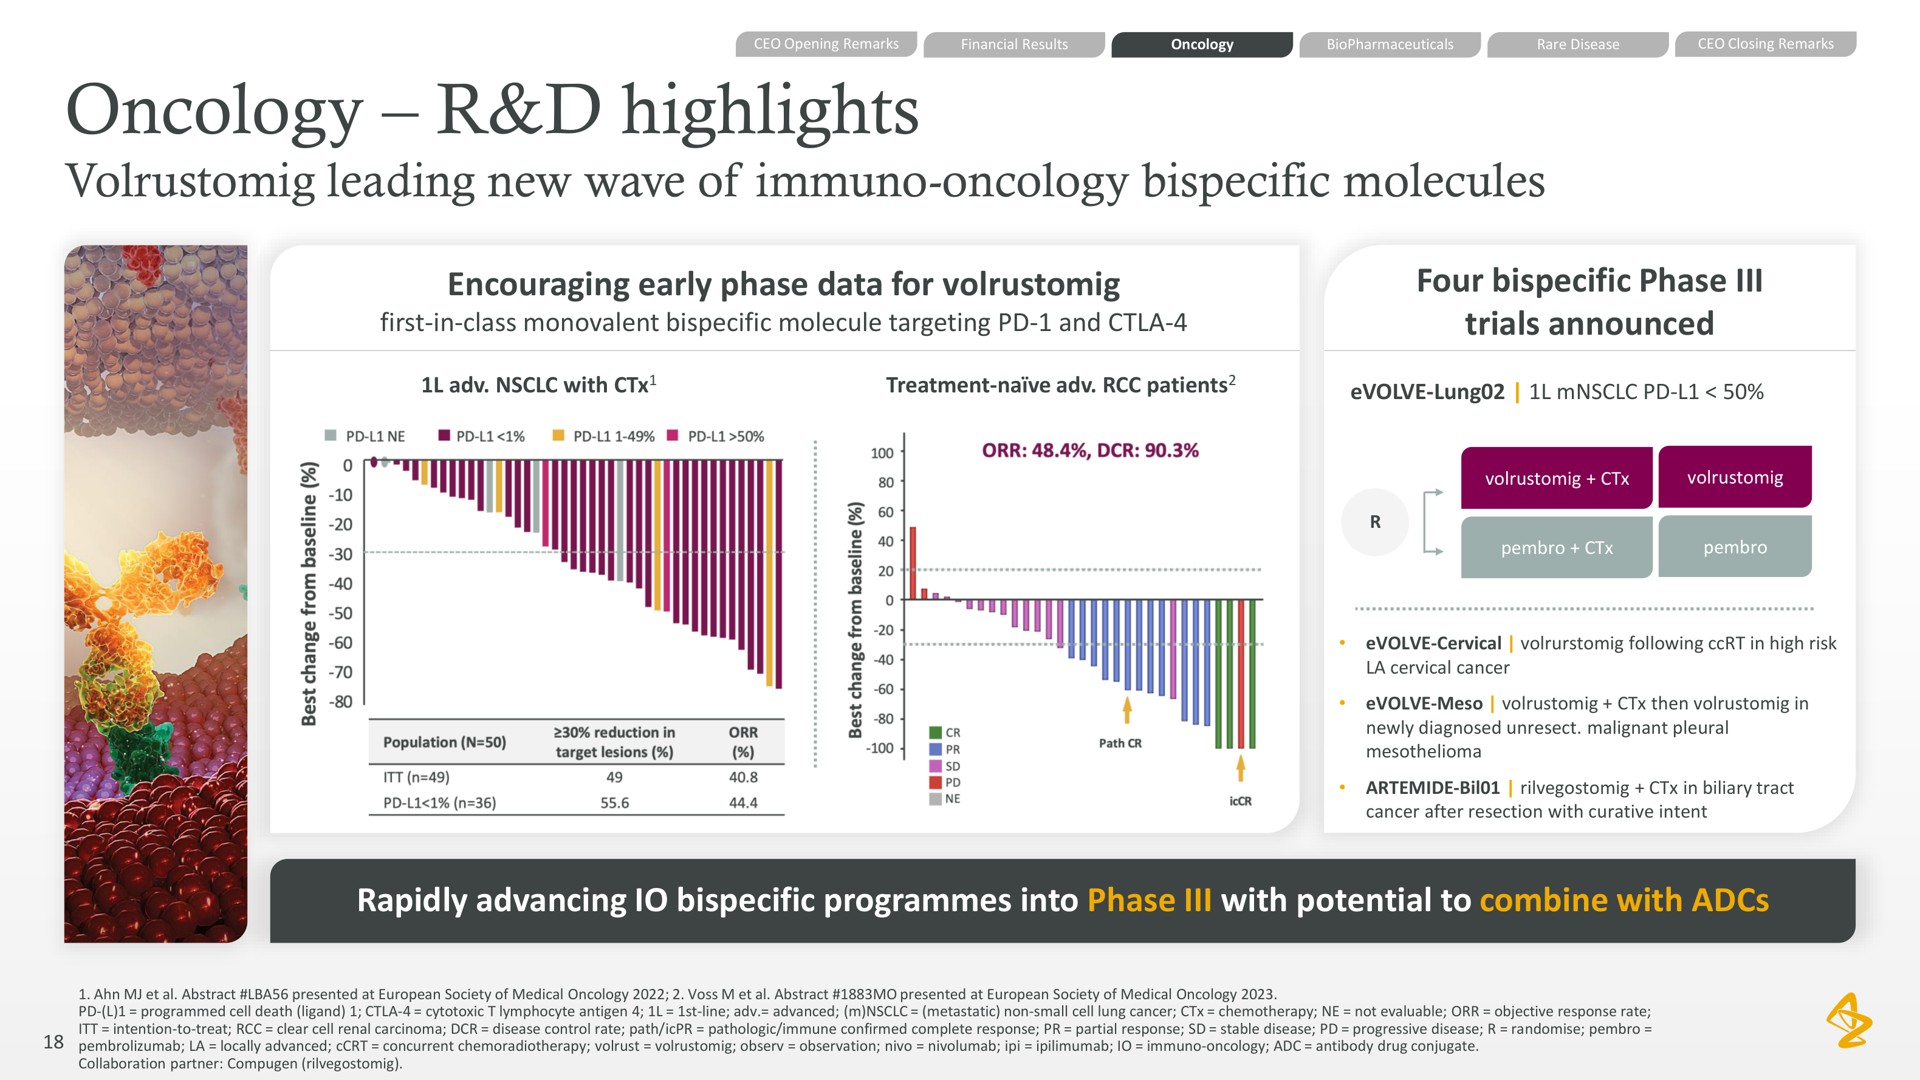 oncology highlights leading new wave of oncology molecules encouraging early phase data for four phase trials announced rapidly advancing programmes into phase with potential to combine with | AstraZeneca